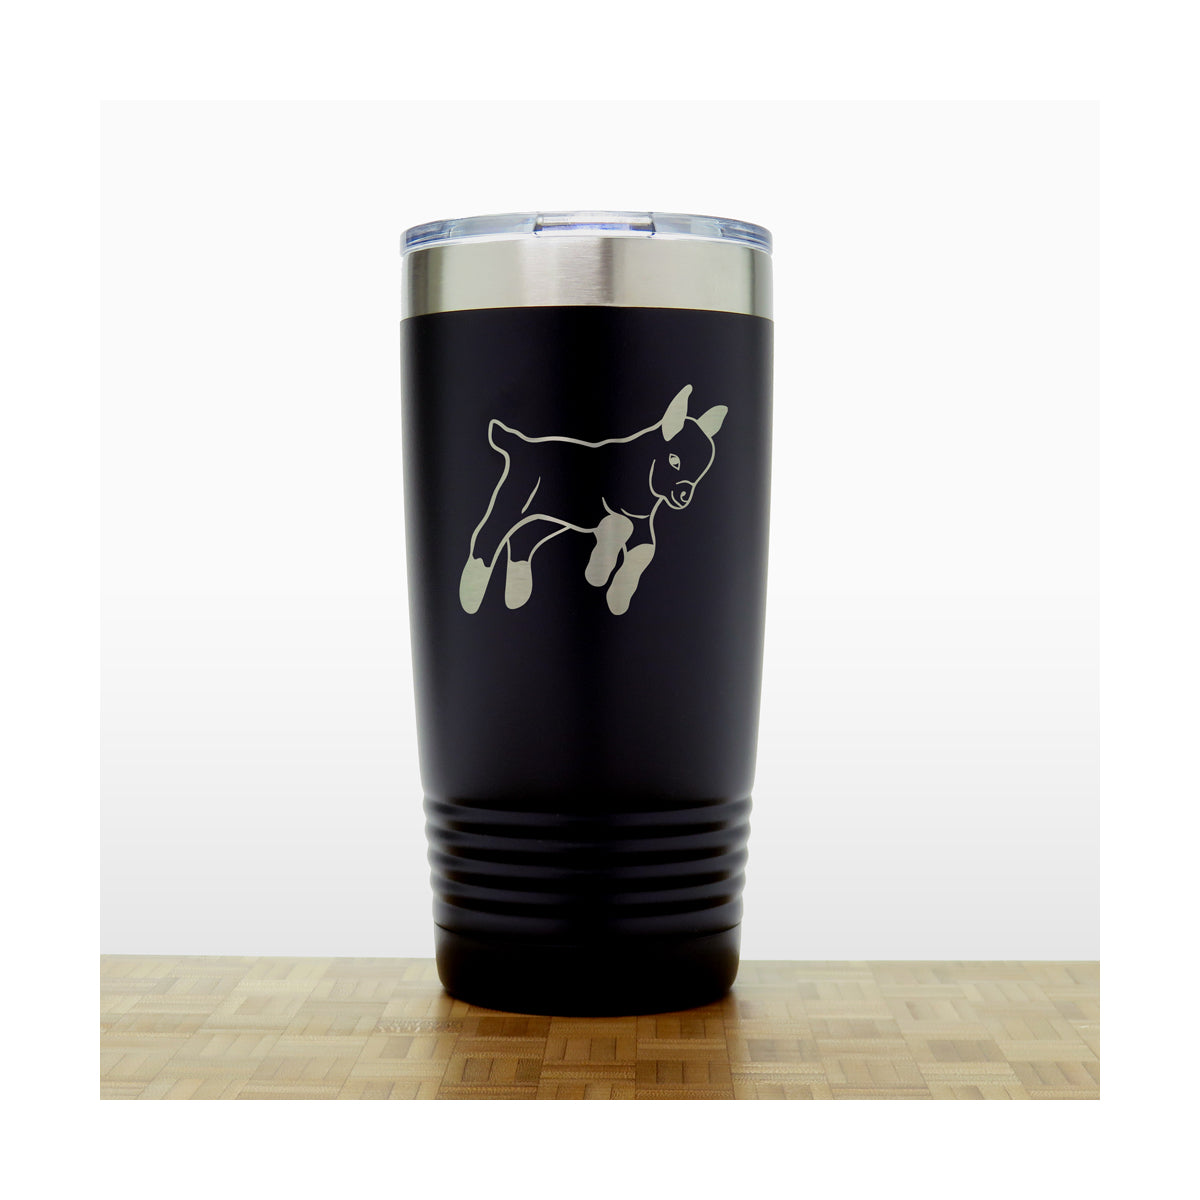 Black - Pygmy Goat 2 20 oz Insulated Tumbler - Copyright Hues in Glass